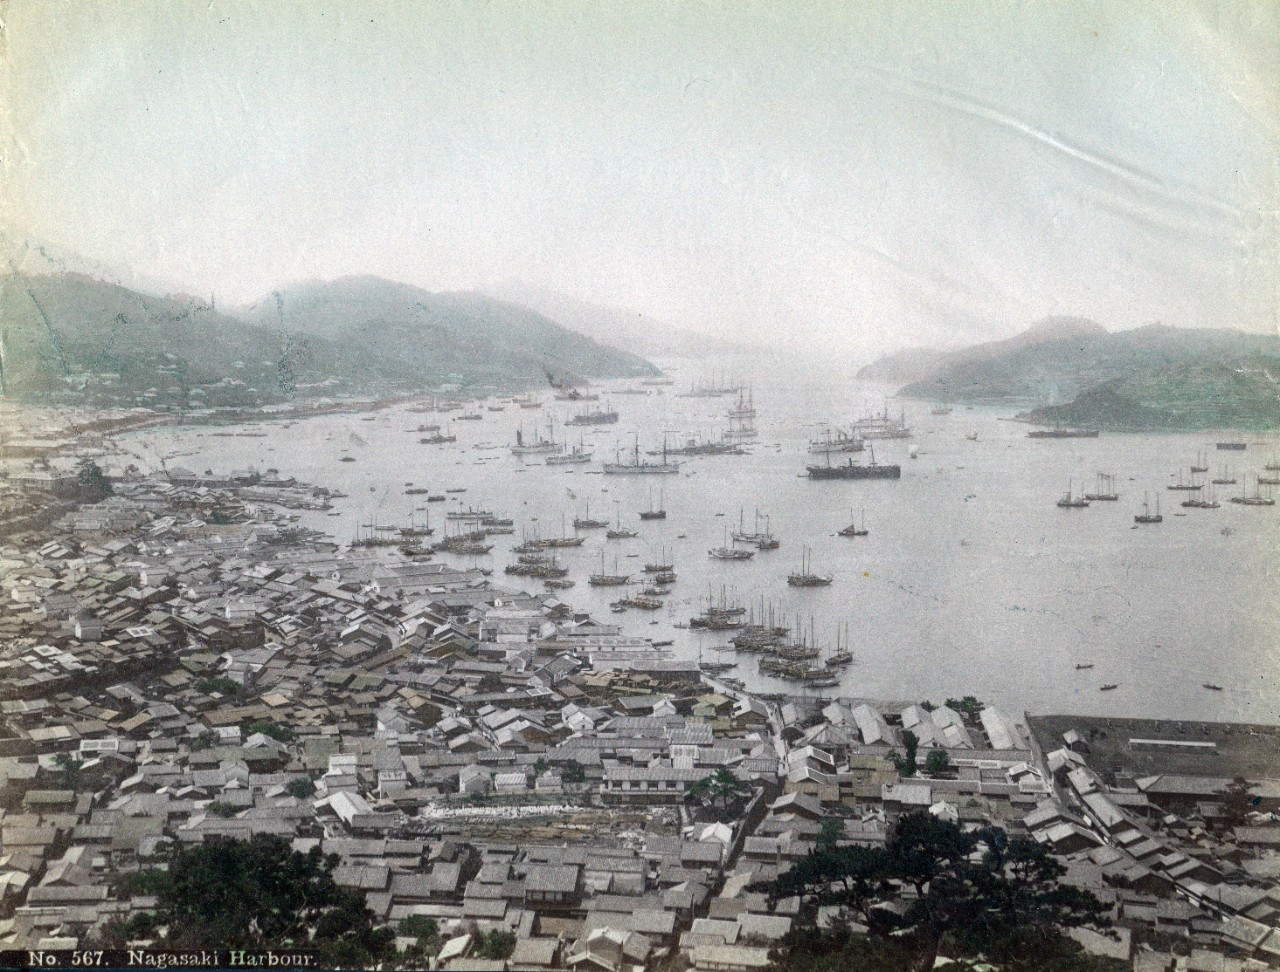 Two photo albums donated to the Naval Historical Foundation by Lieutenant Commander Oscar W. Farenholt, and subsequently donated to the Naval History and Heritage Command.  Albums contain hand tinted photography of China and Japan circa 1890-1905.